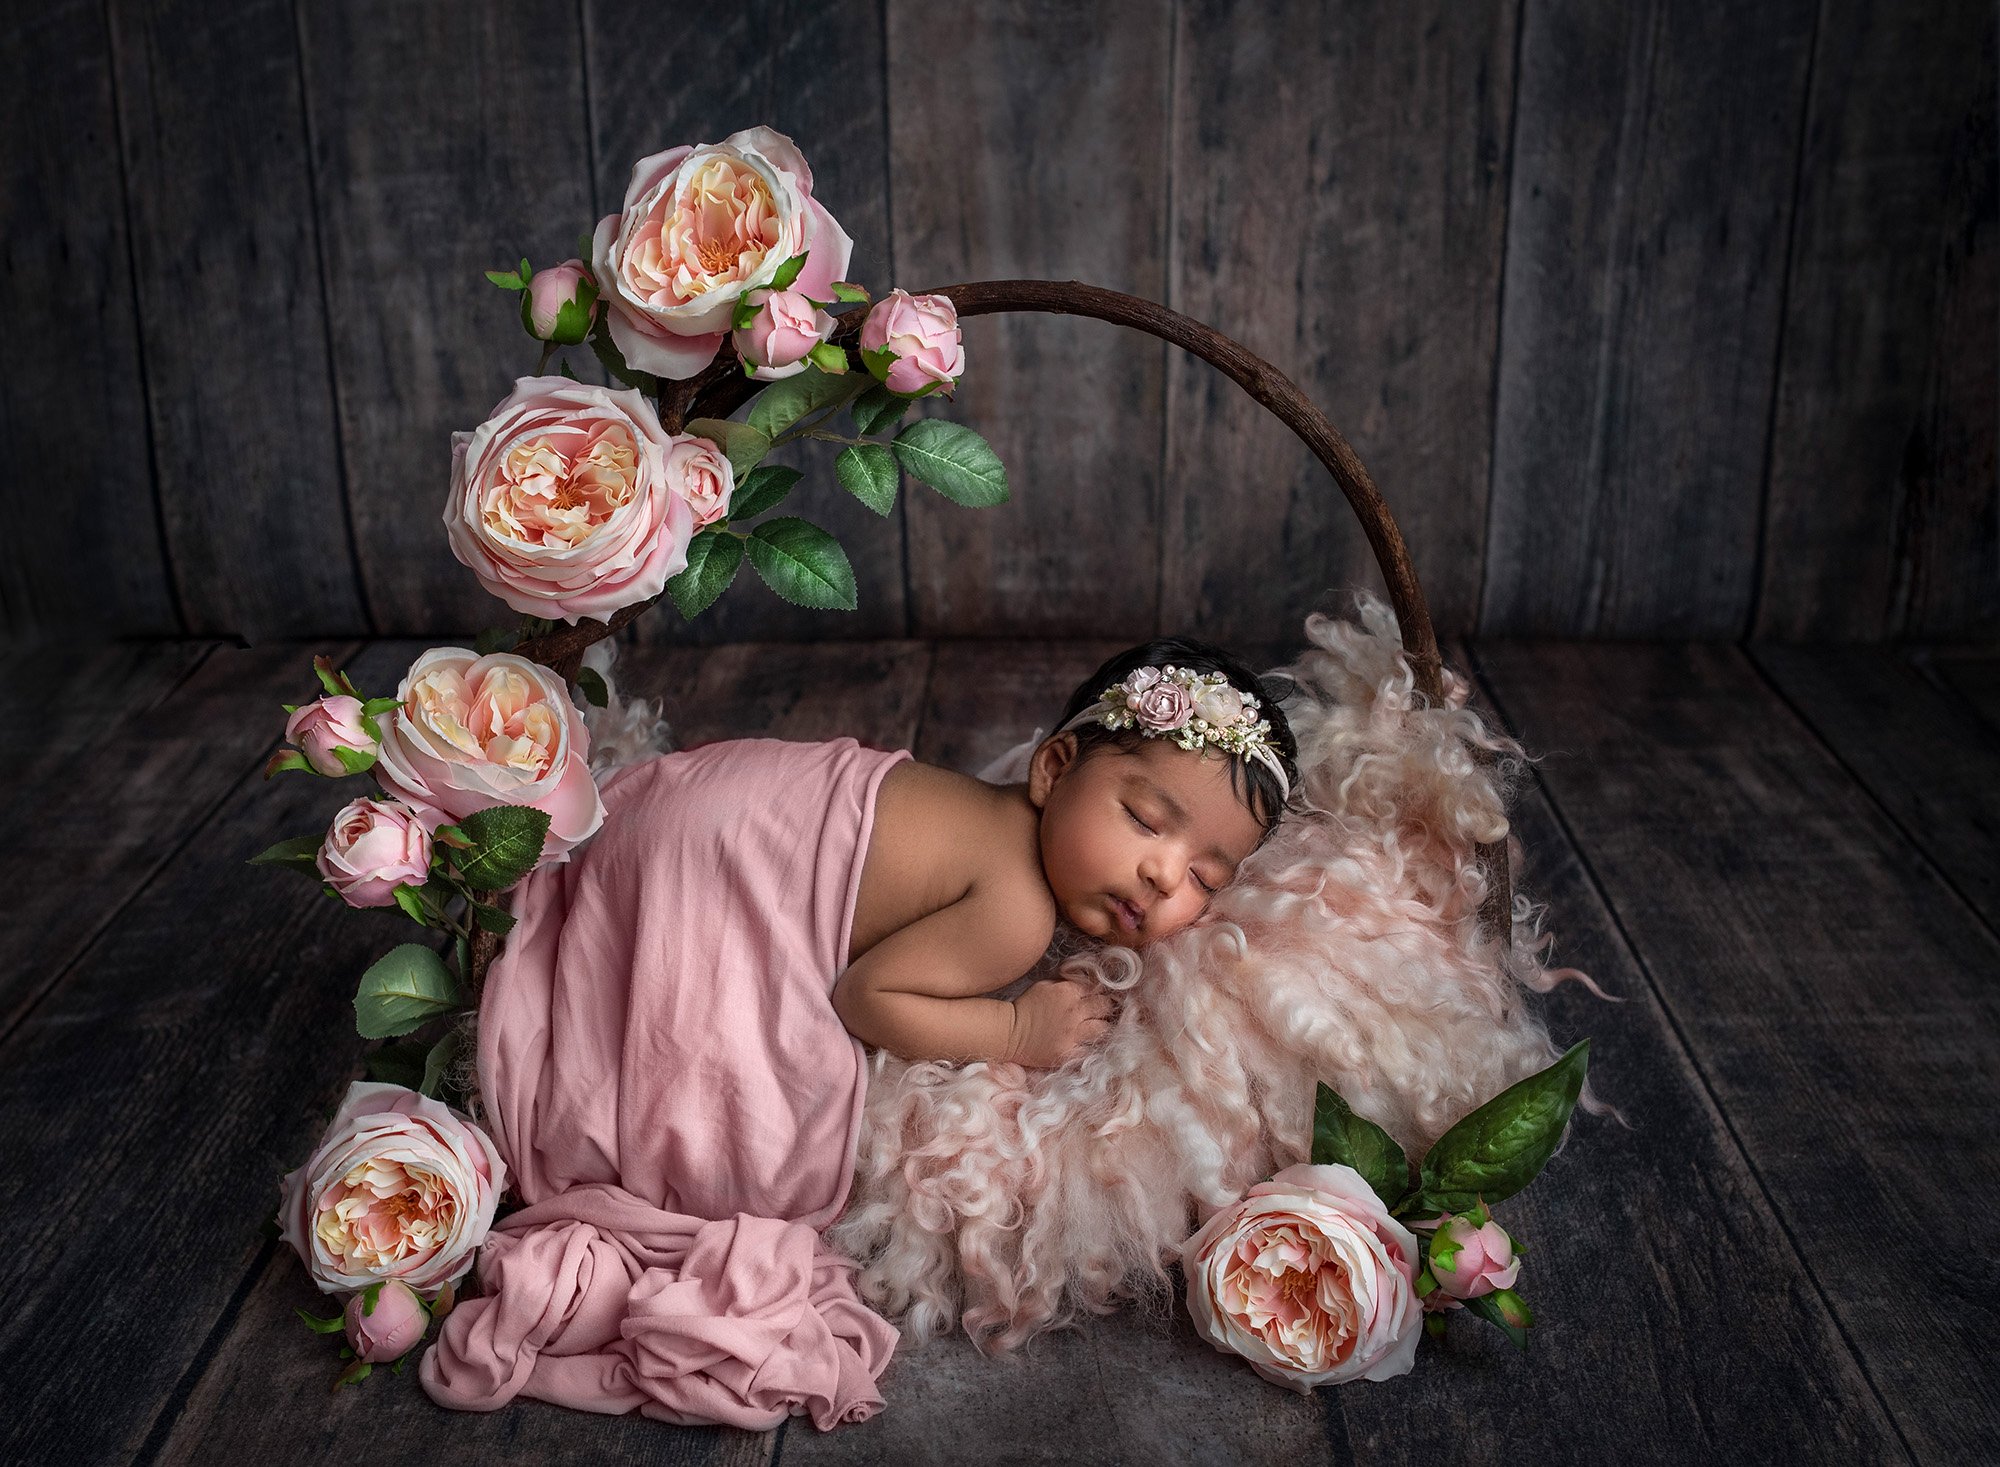 Newborn Girl Photography newborn baby girl draped in pink sleeping on top of rustic wooden bed with pink fuzzy blanket surrounded by pink flowers on wooden background